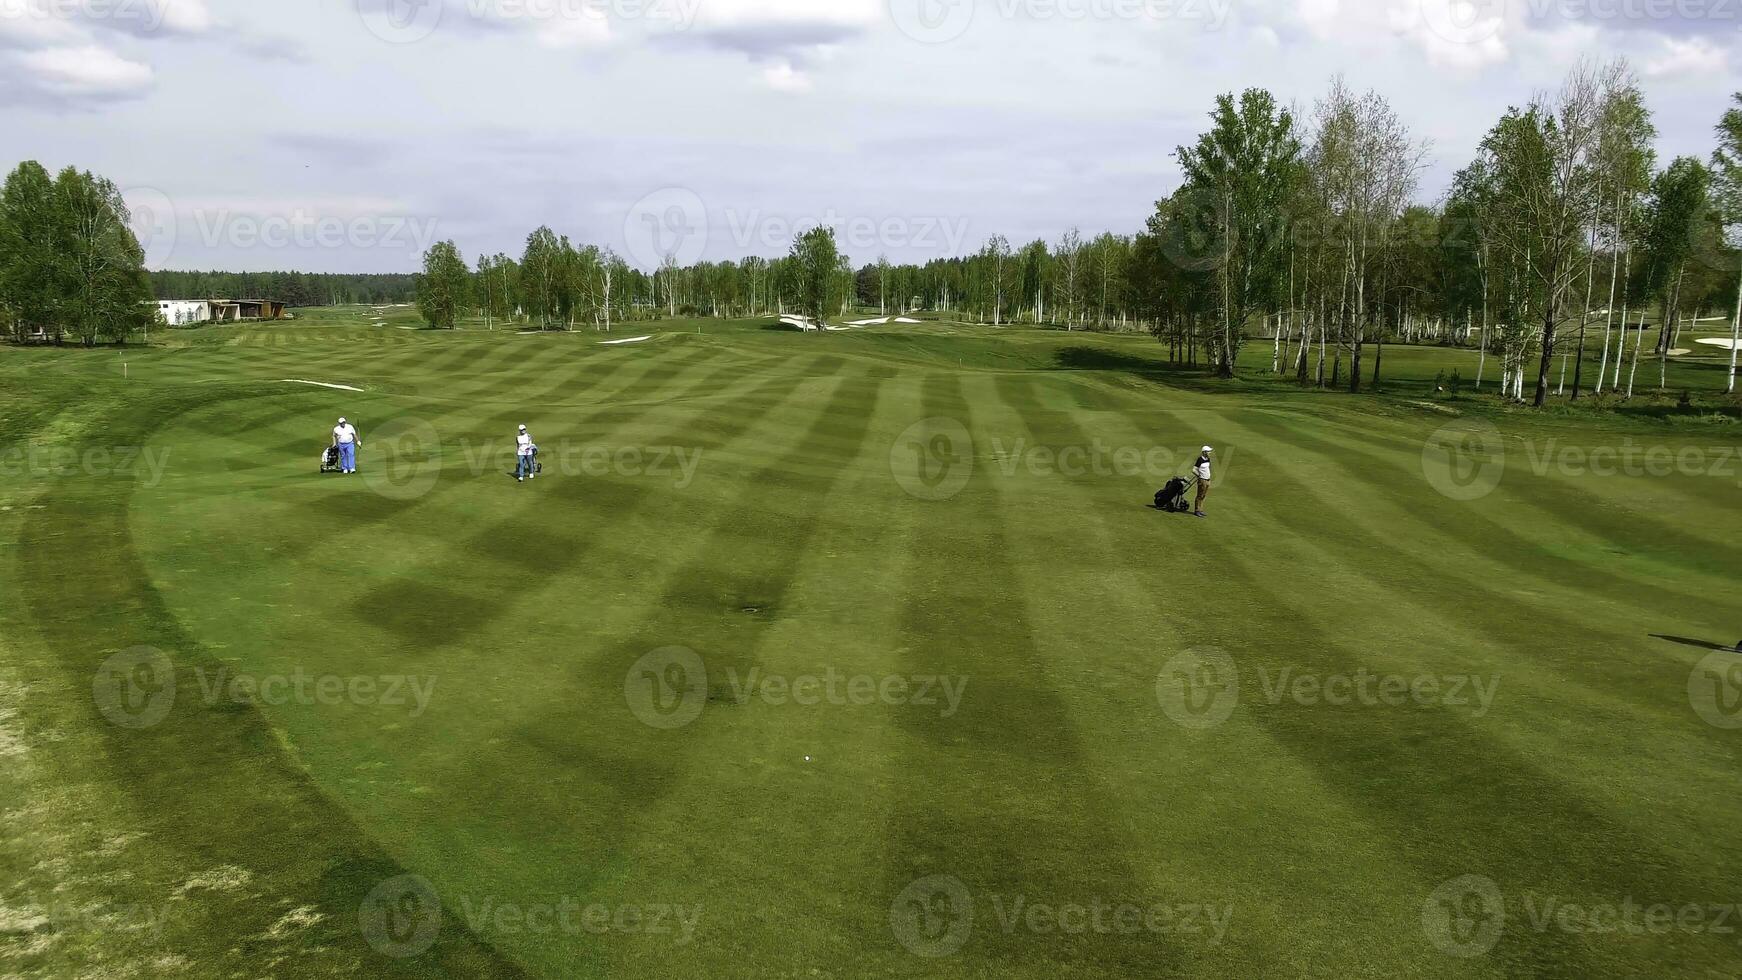 Aerial view Golf course. Golfers walking down the fairway on a course with golf bag and trolley photo